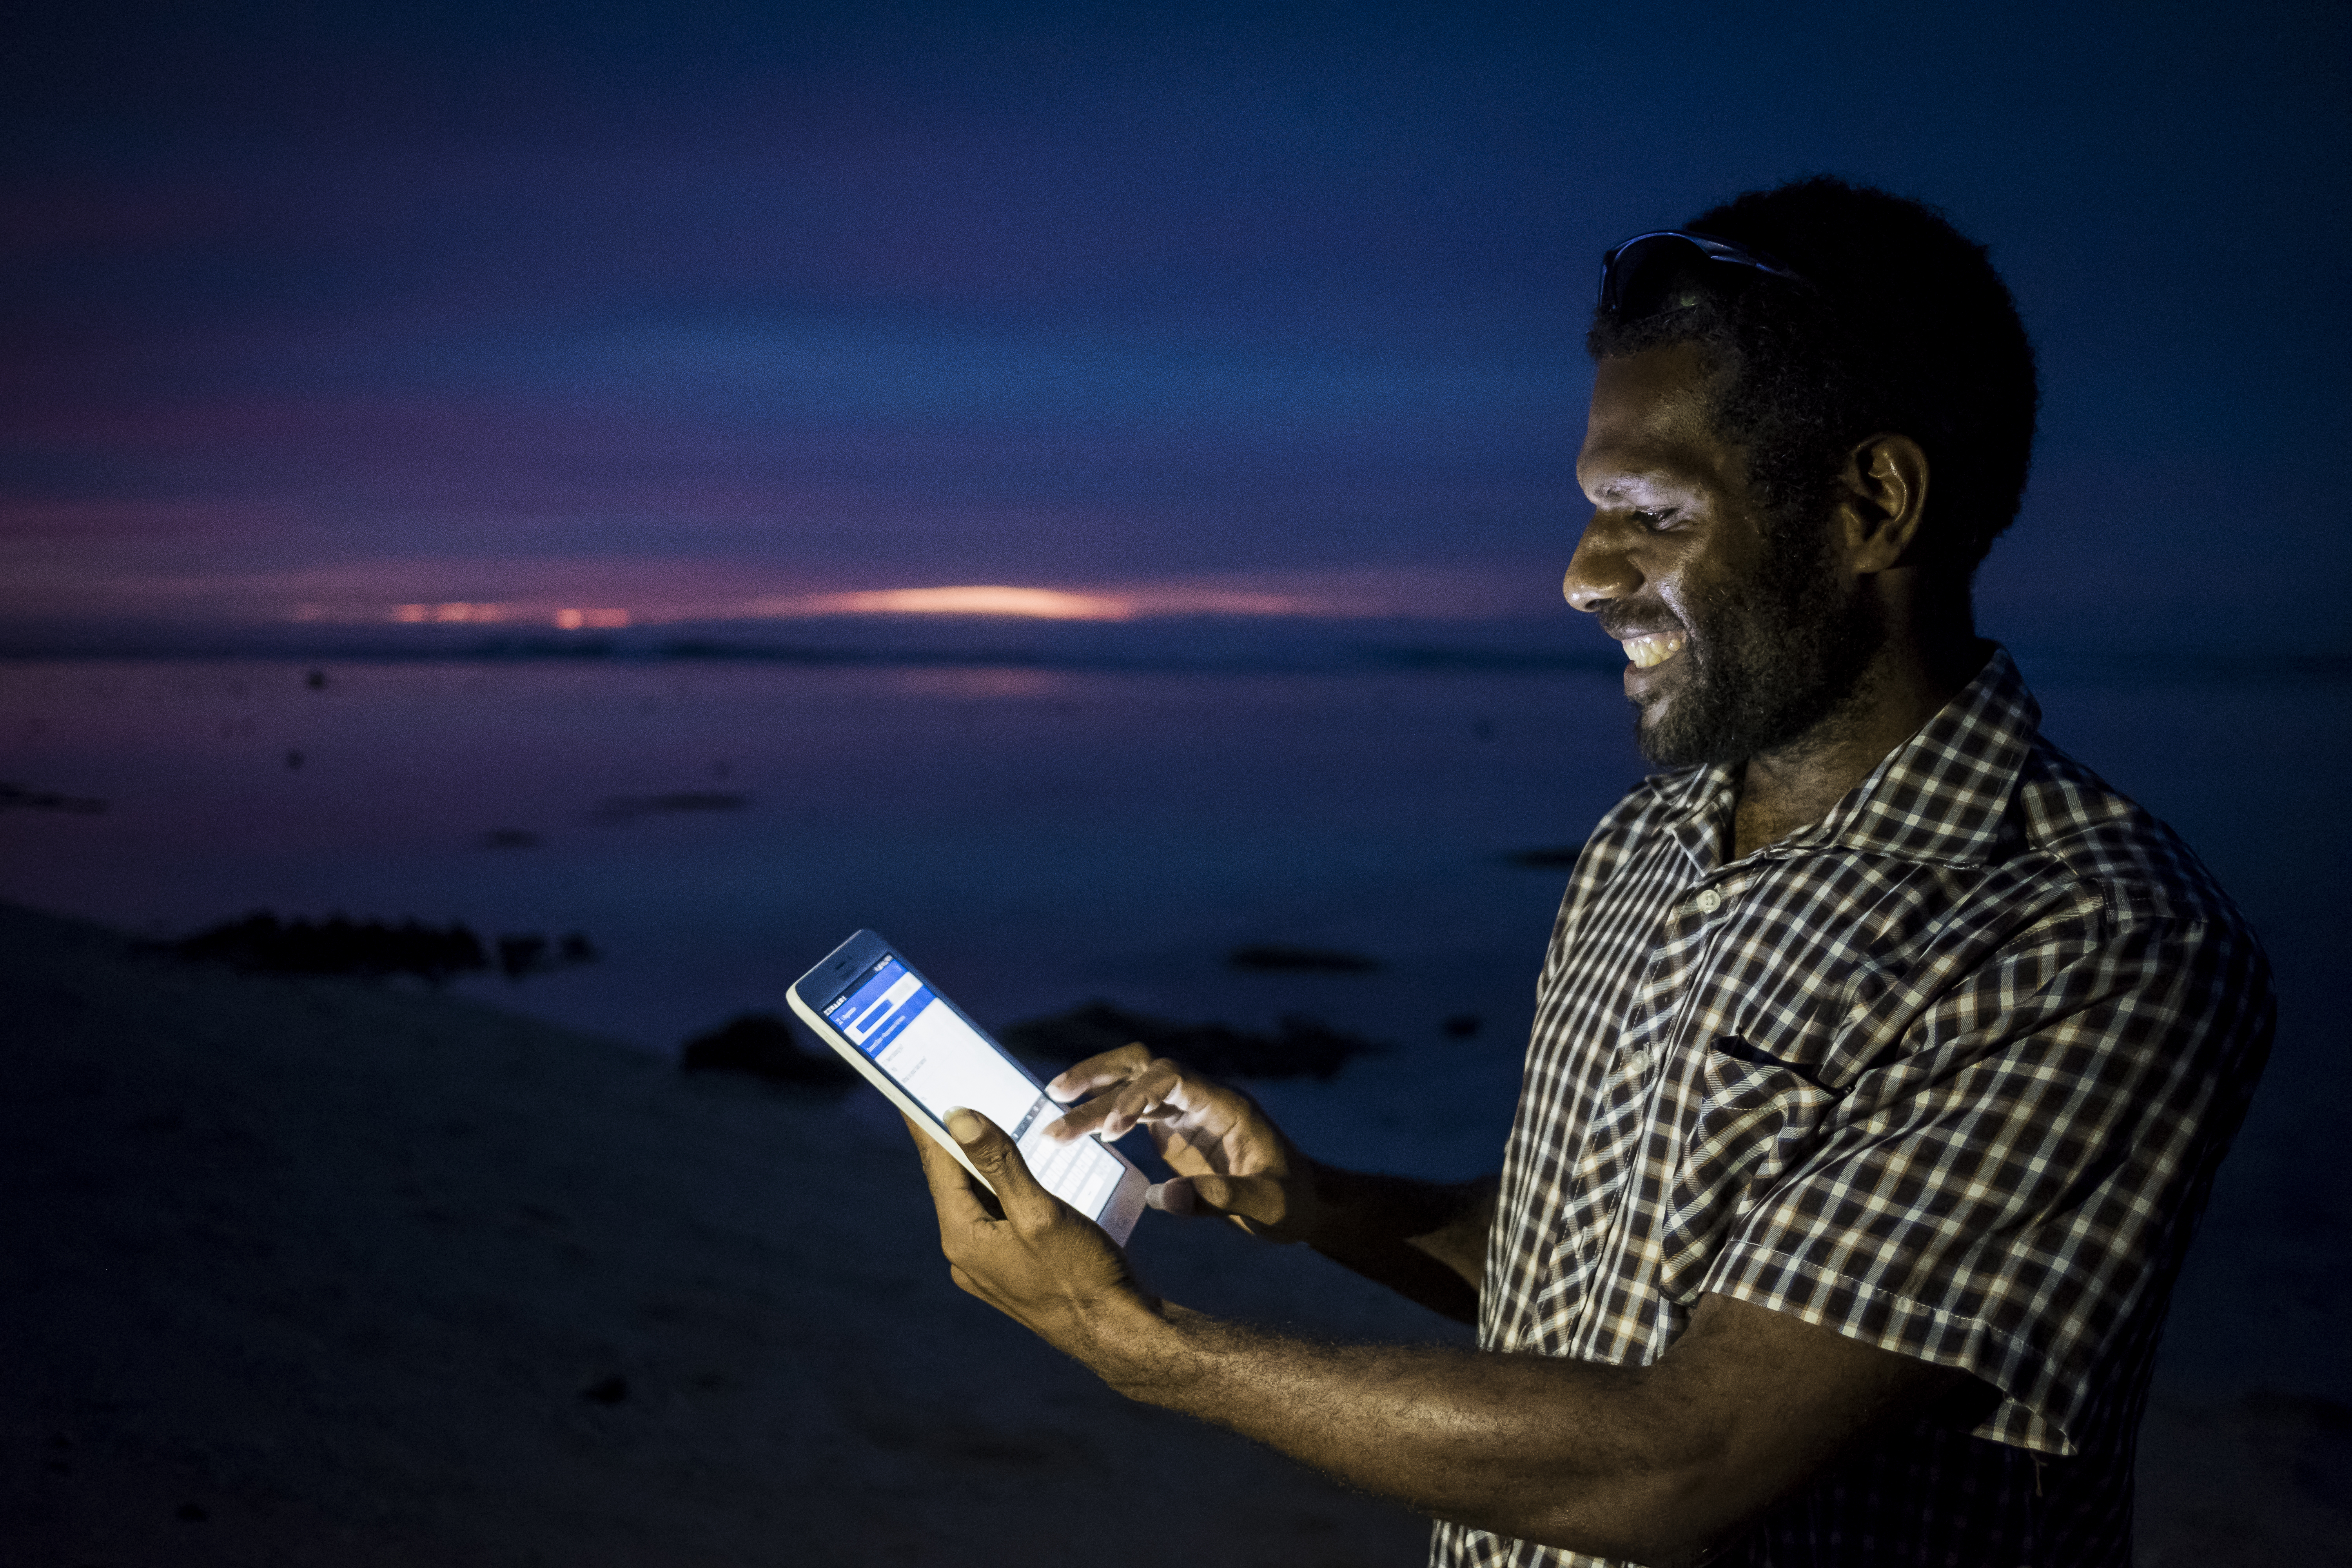 Man looking a mobile device in the evening time with ocean in the background